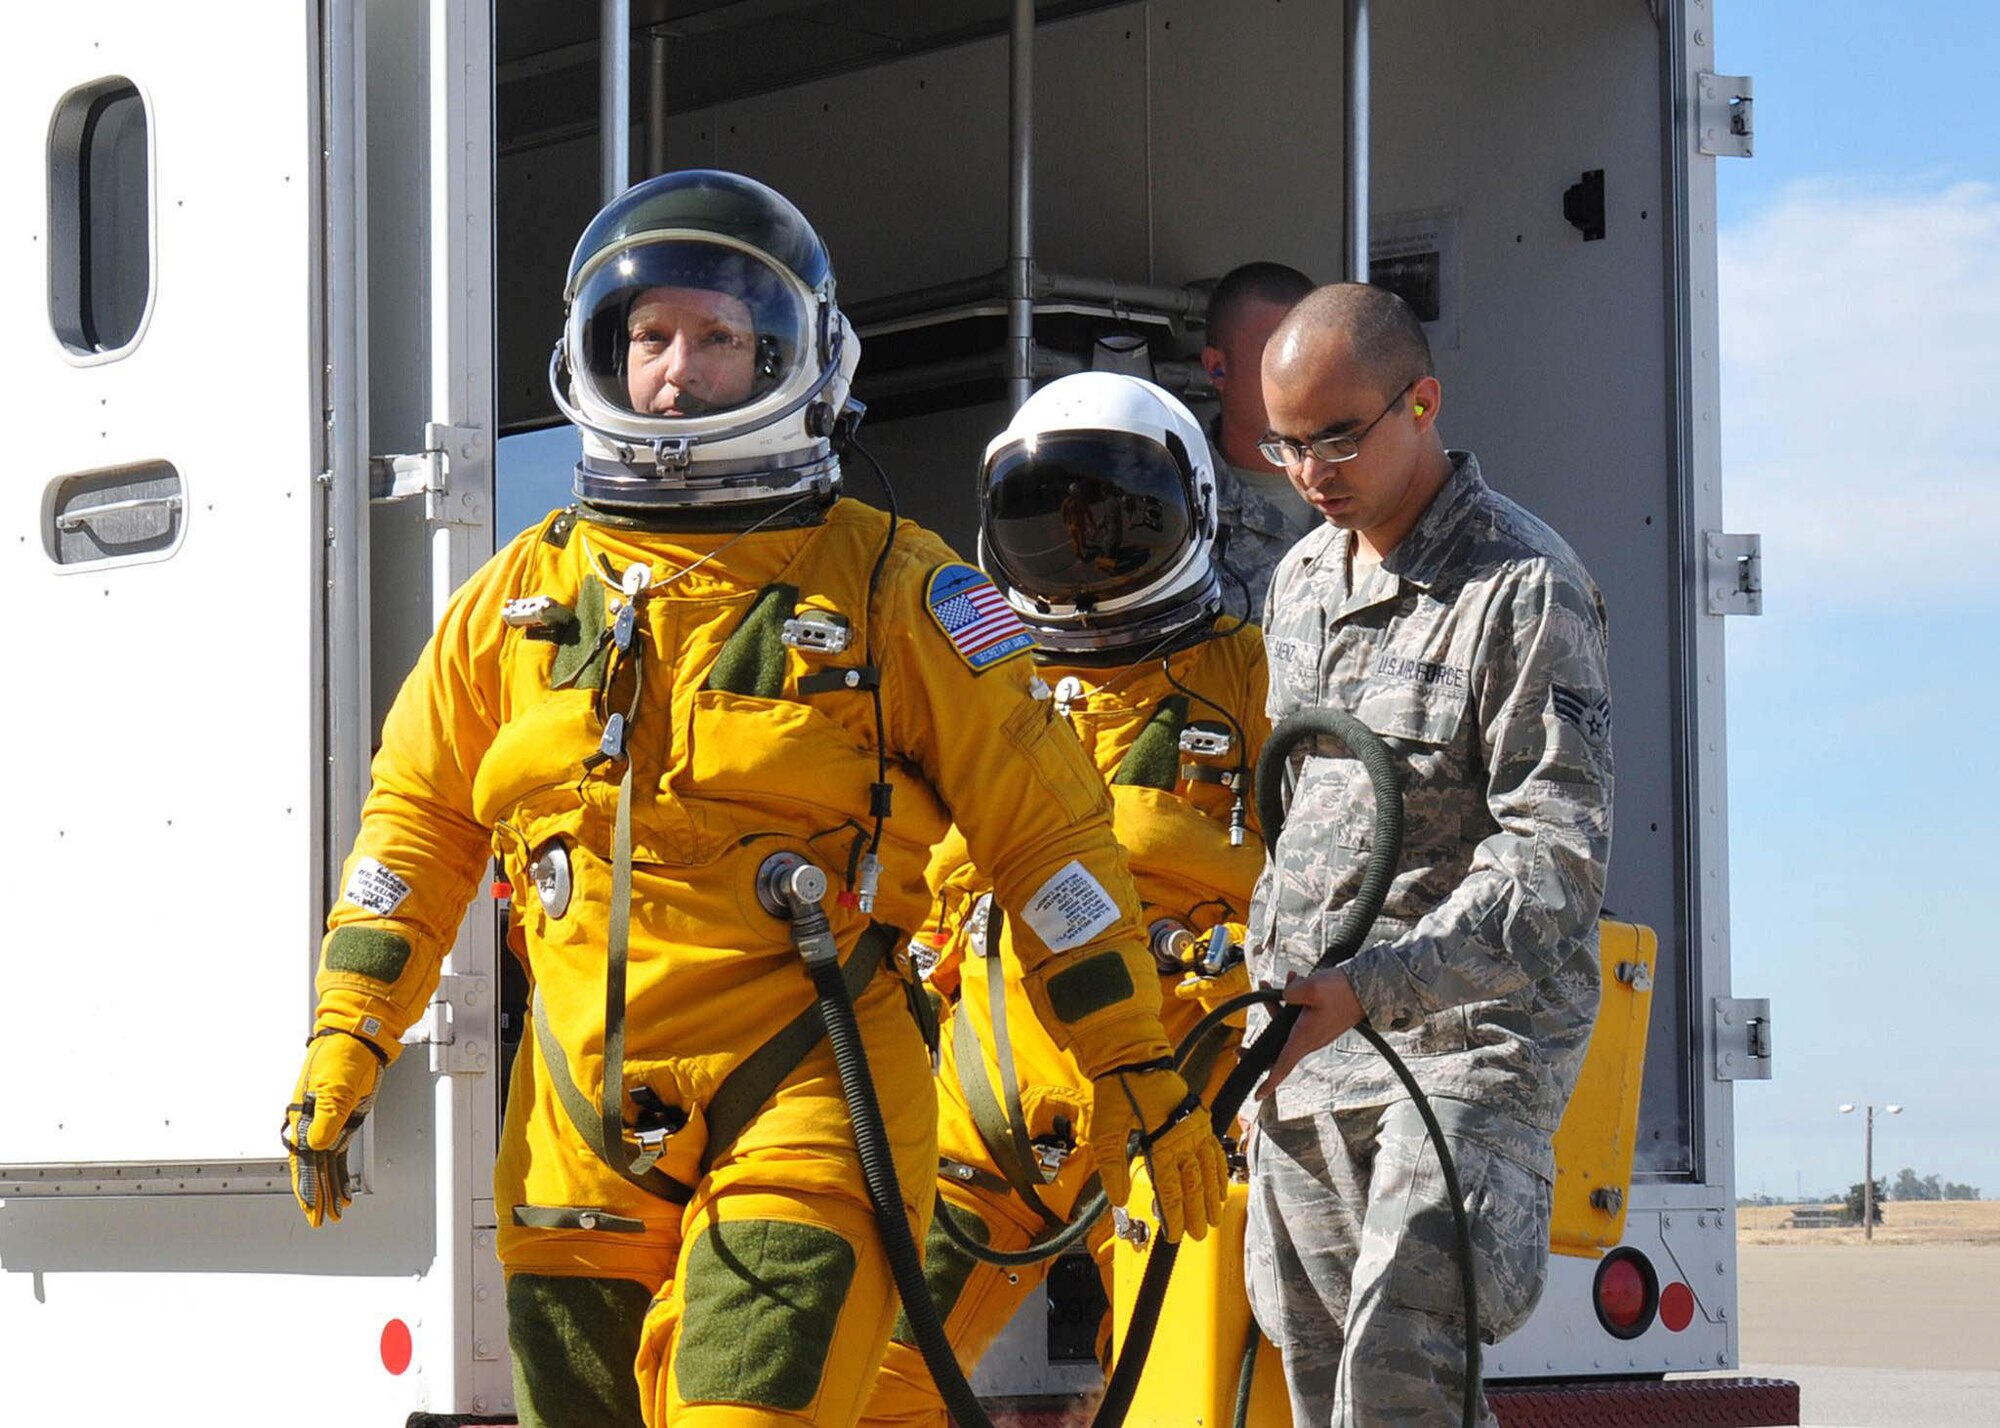 Secretary of the Air Force Deborah Lee James walks to a U-2S as Senior Airman Aaron Saenz, a 9th Physiological Support Squadron launch and recovery technician, carries the high-altitude pressure suit auxiliary equipment at Beale Air Force Base, Calif., Aug. 11, 2015. The specialized pressure suit allows U-2S pilots to safely fly at altitudes reaching 70,000 feet. James visited Beale AFB to receive a firsthand perspective of high-altitude intelligence, surveillance and reconnaissance from collection to dissemination. (U.S. Air Force photo/Senior Airman Dana J. Cable)